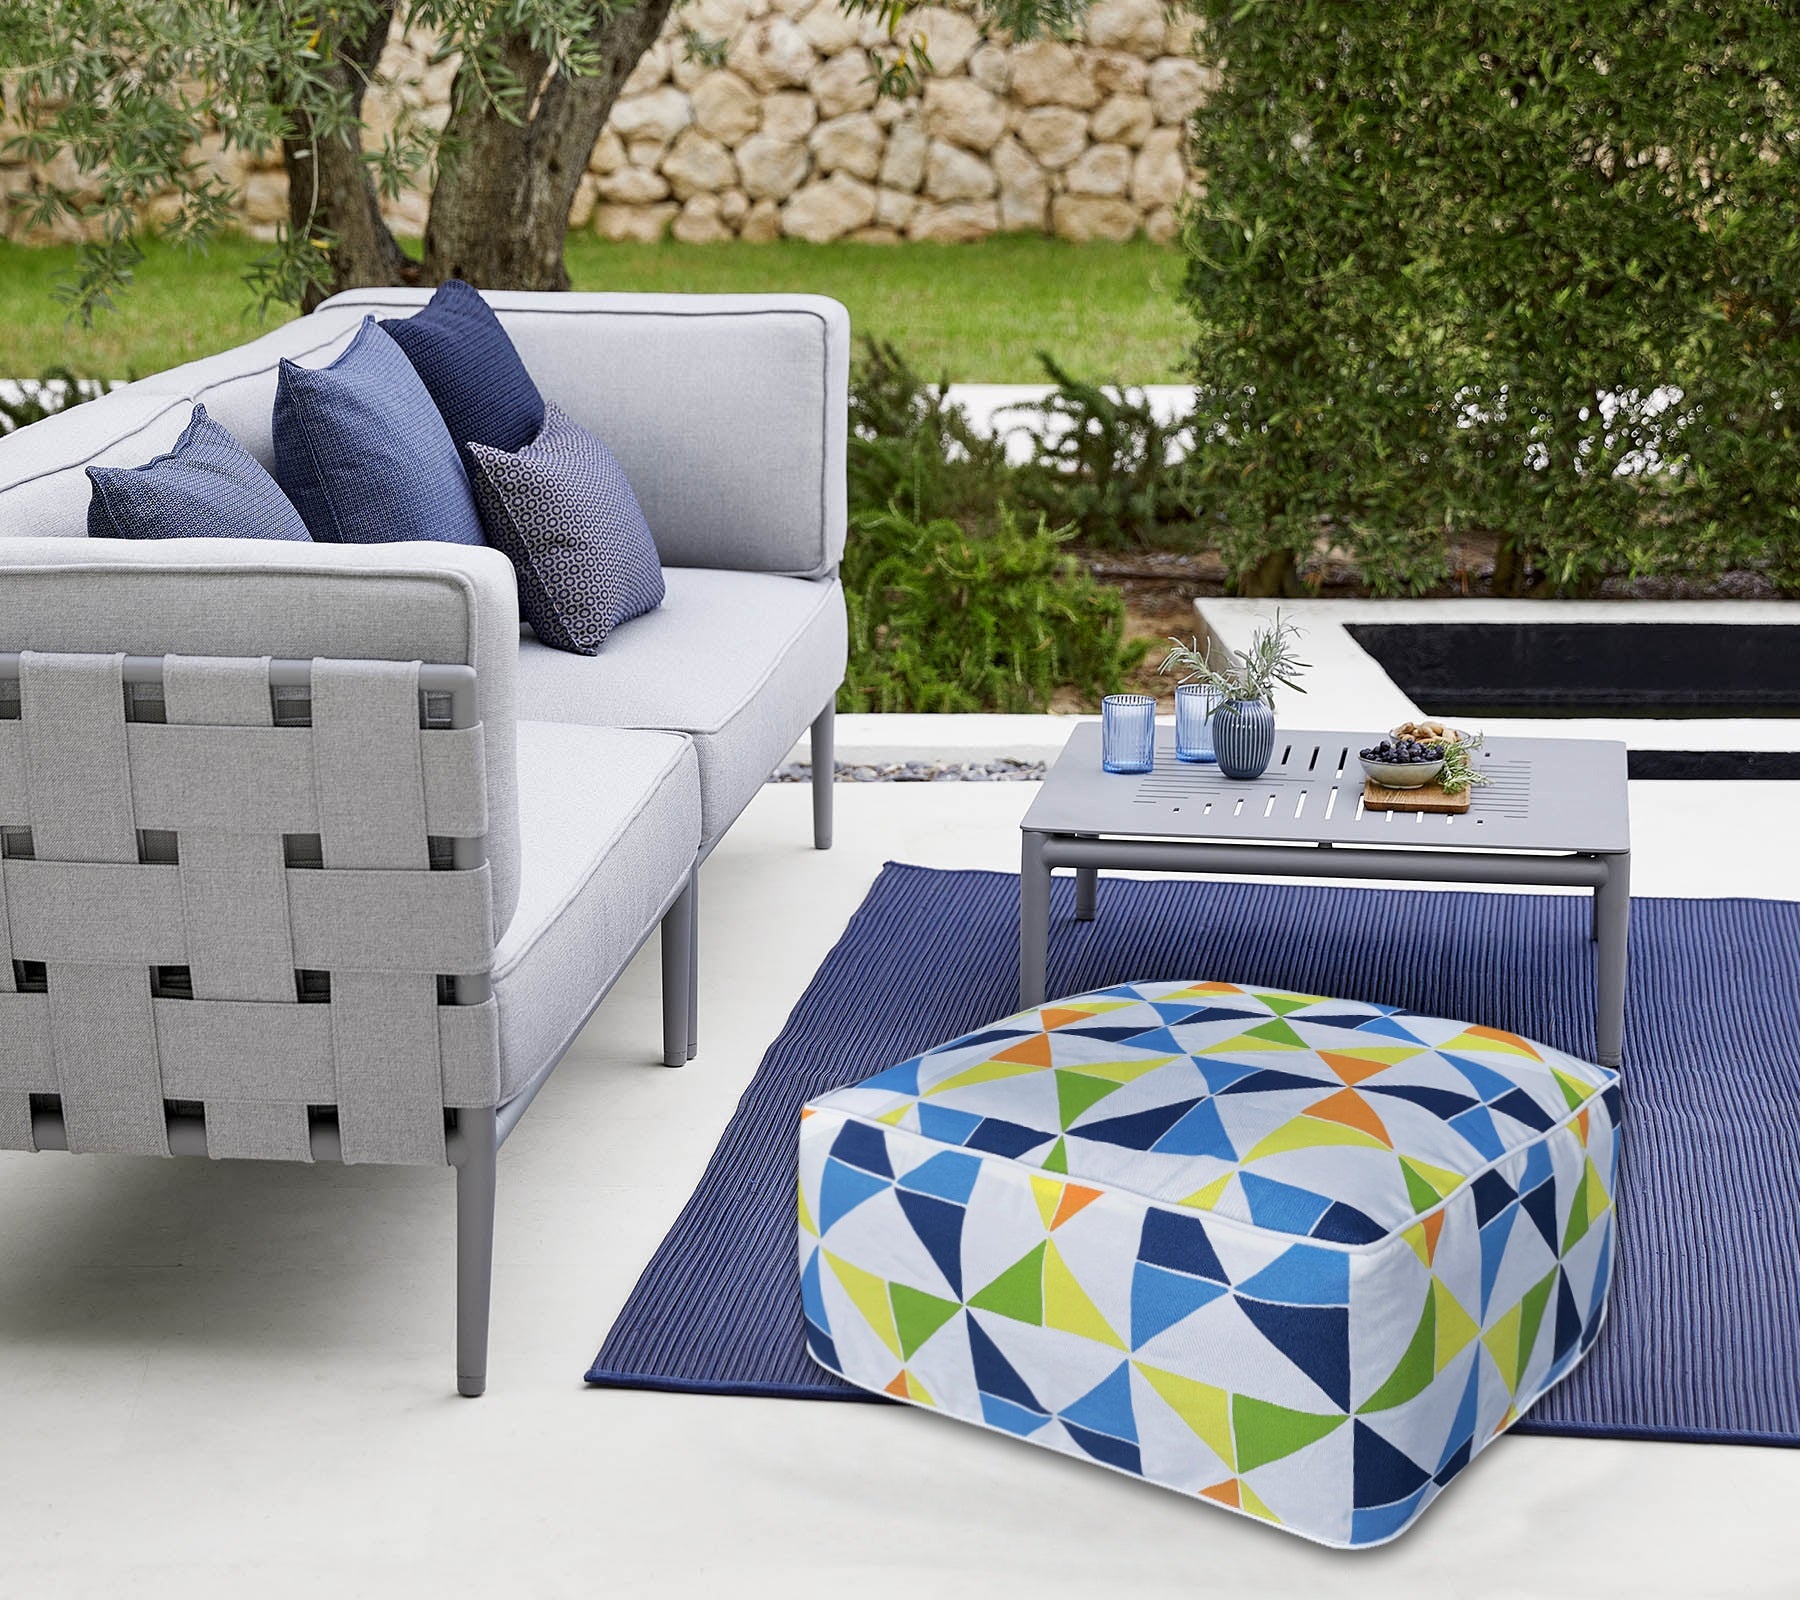 Outdoor Inflatable Ottoman Blue Square 23x23x9 Inch Patio Foot Stools and Ottomans